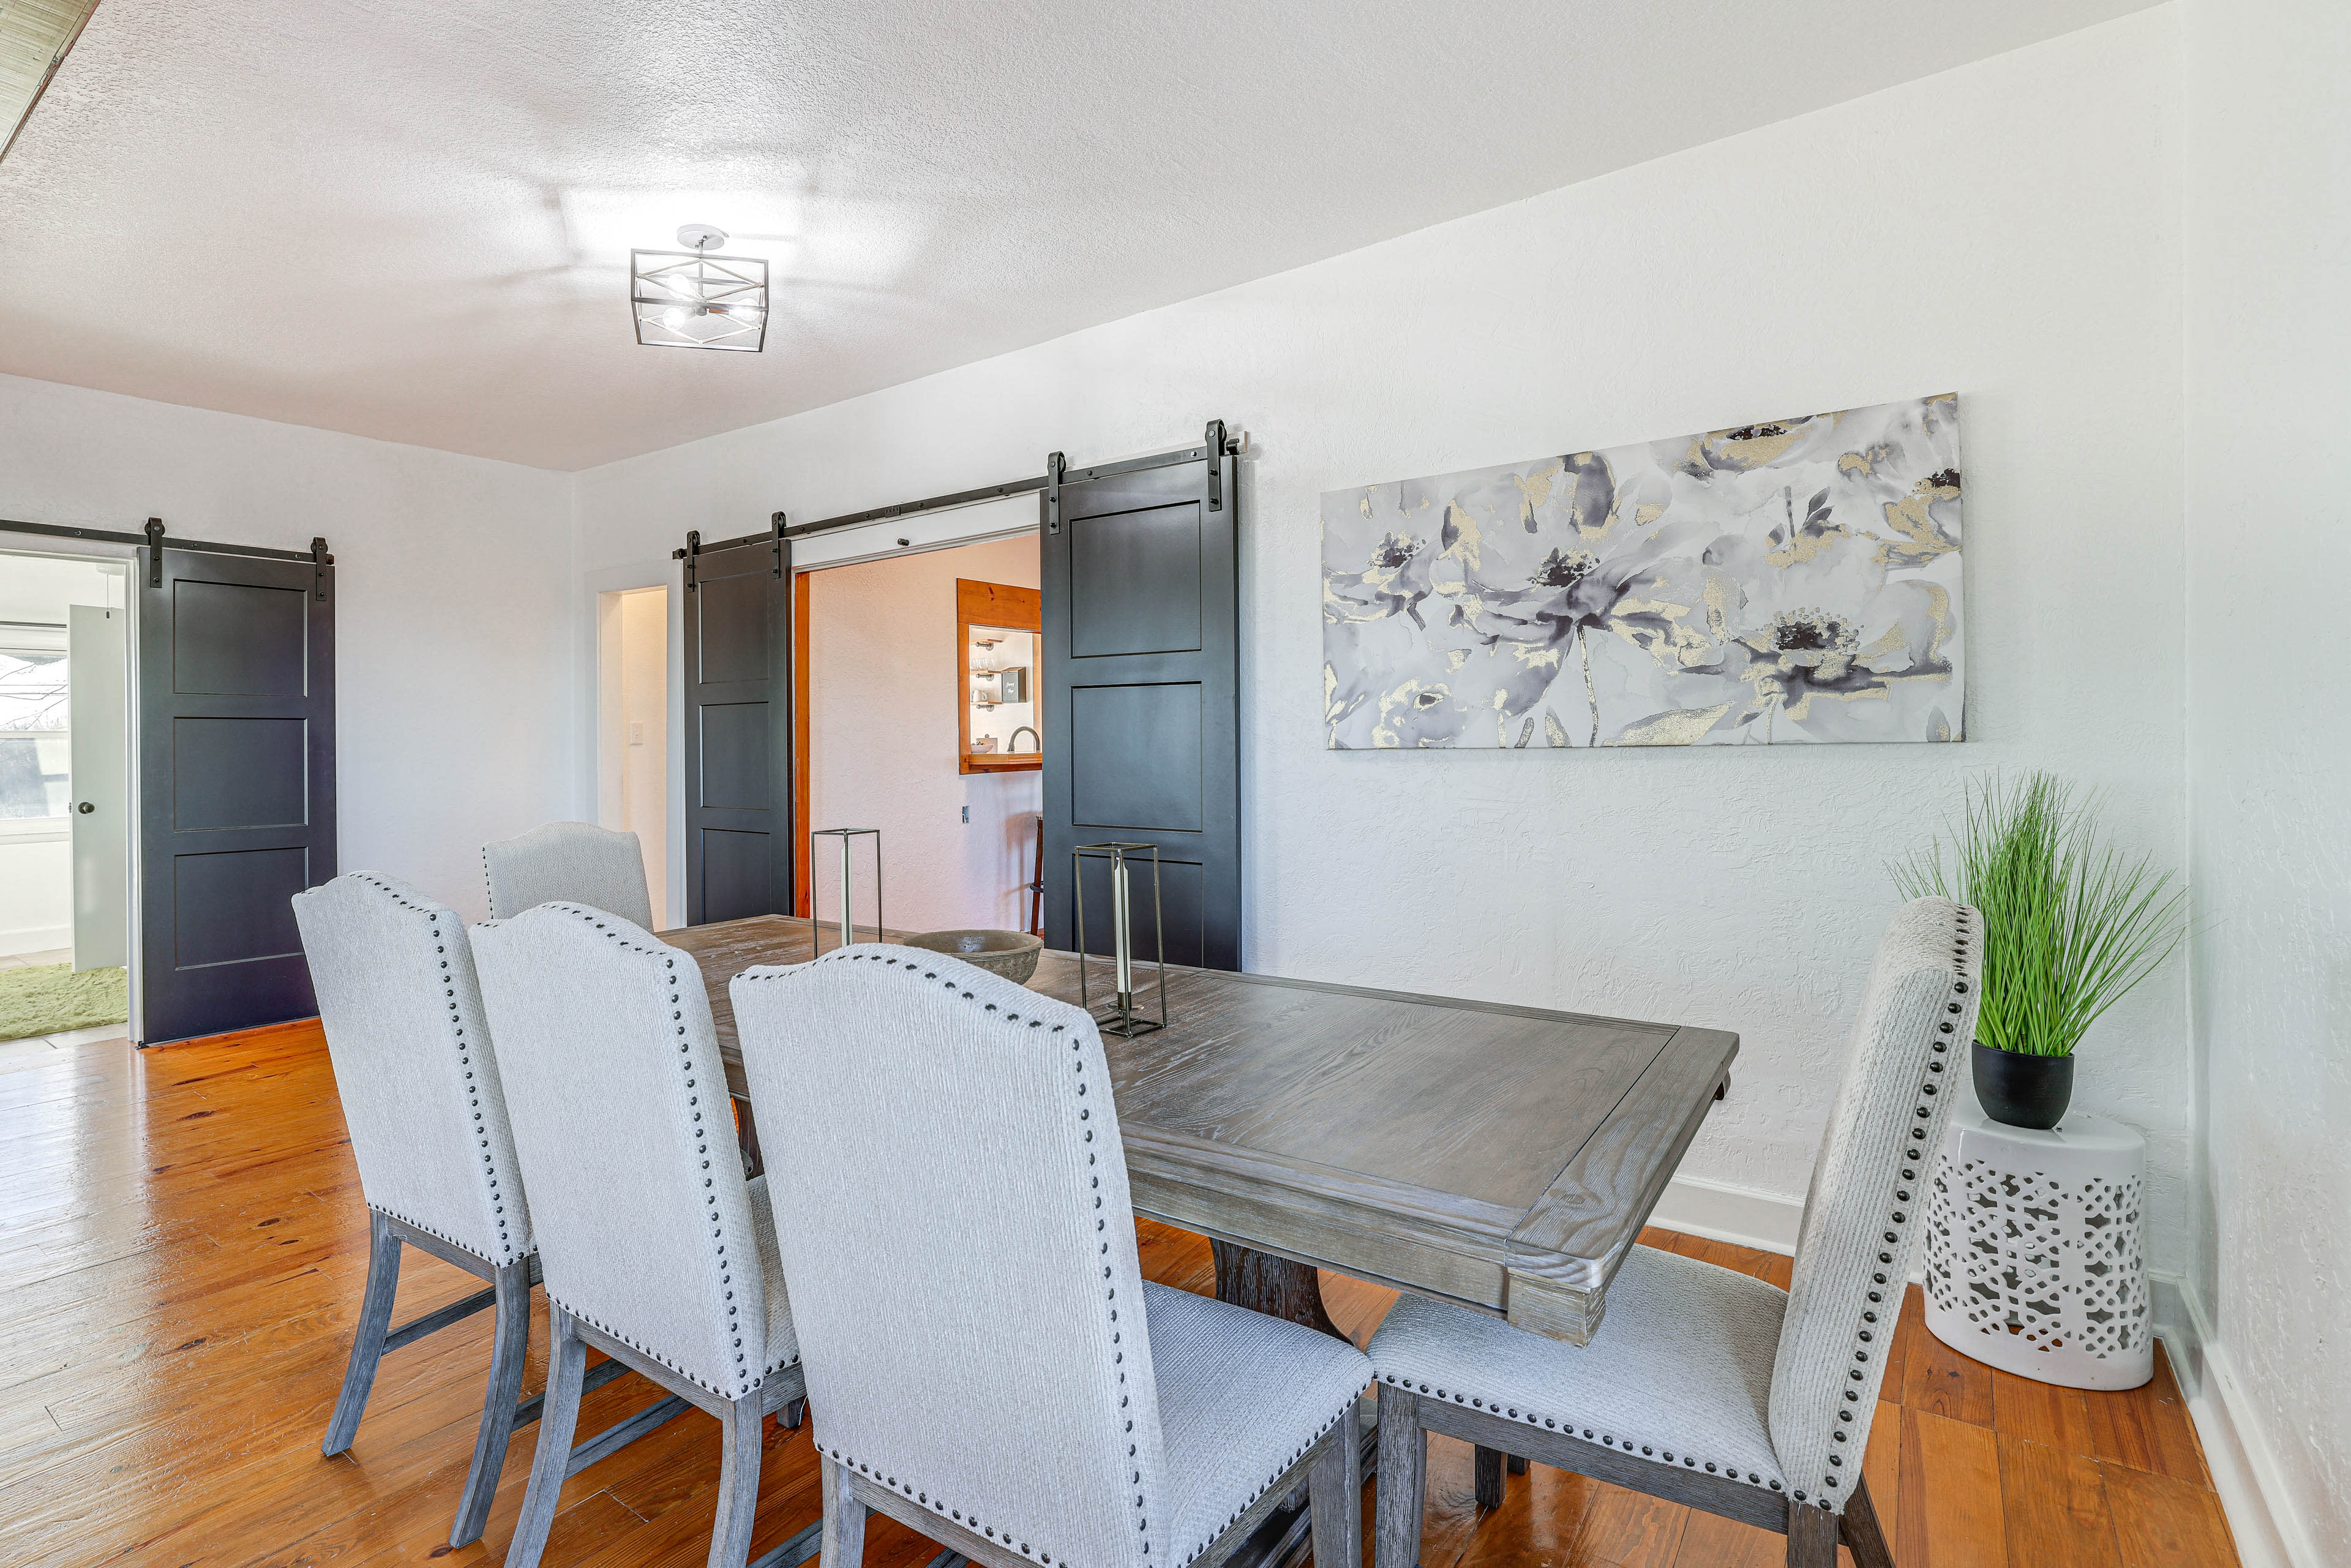 Dining Area | Dishware & Flatware Provided | Central Heating & A/C